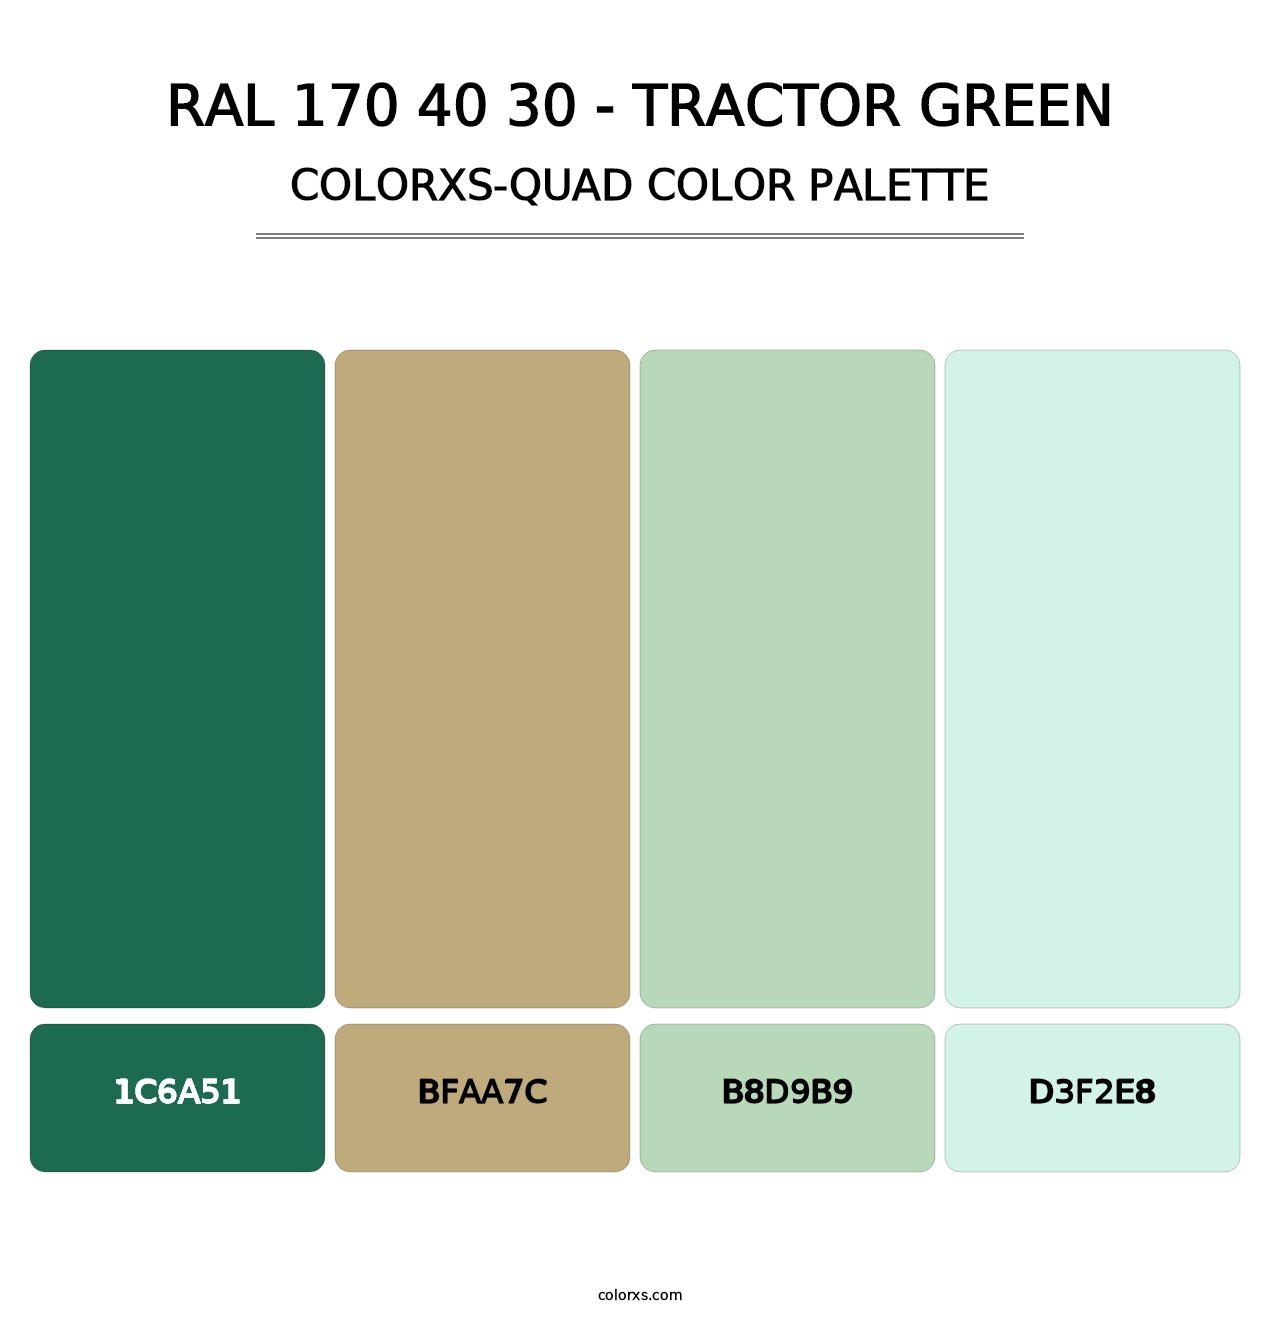 RAL 170 40 30 - Tractor Green - Colorxs Quad Palette